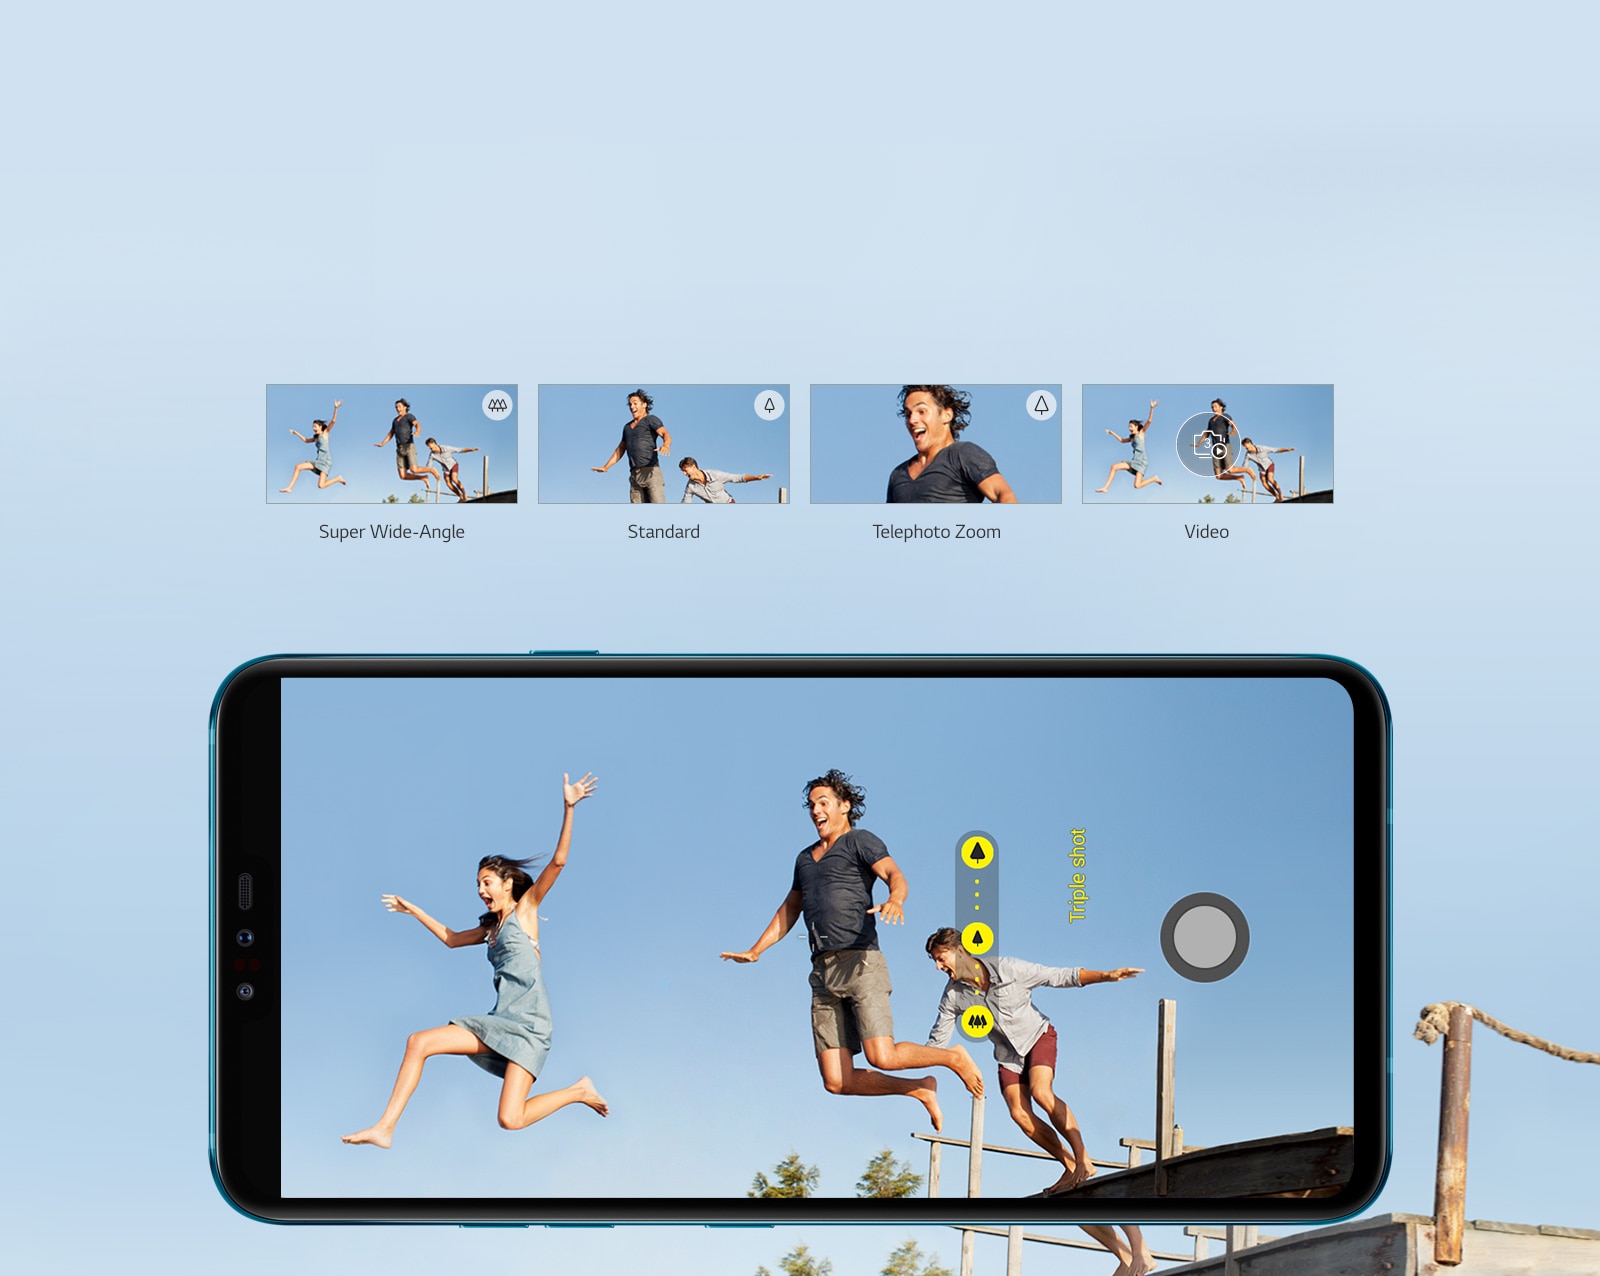 Photo features to enjoy with your LG® smartphone